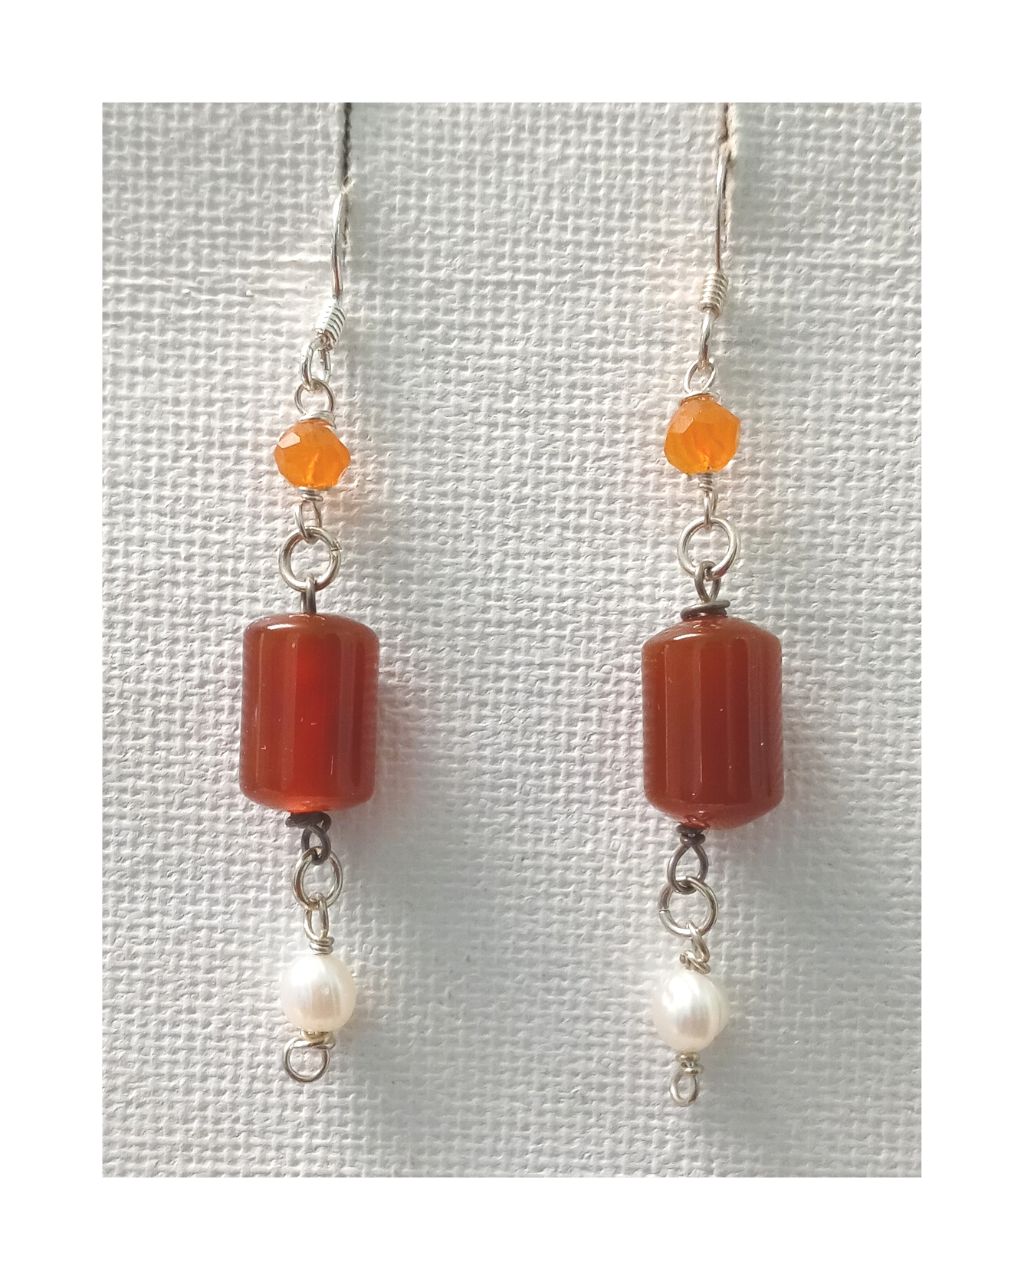 Faceted Carnelian, Red Agate, and White Pearl Sterling Silver Dangle Earrings approx. 2 5/16"